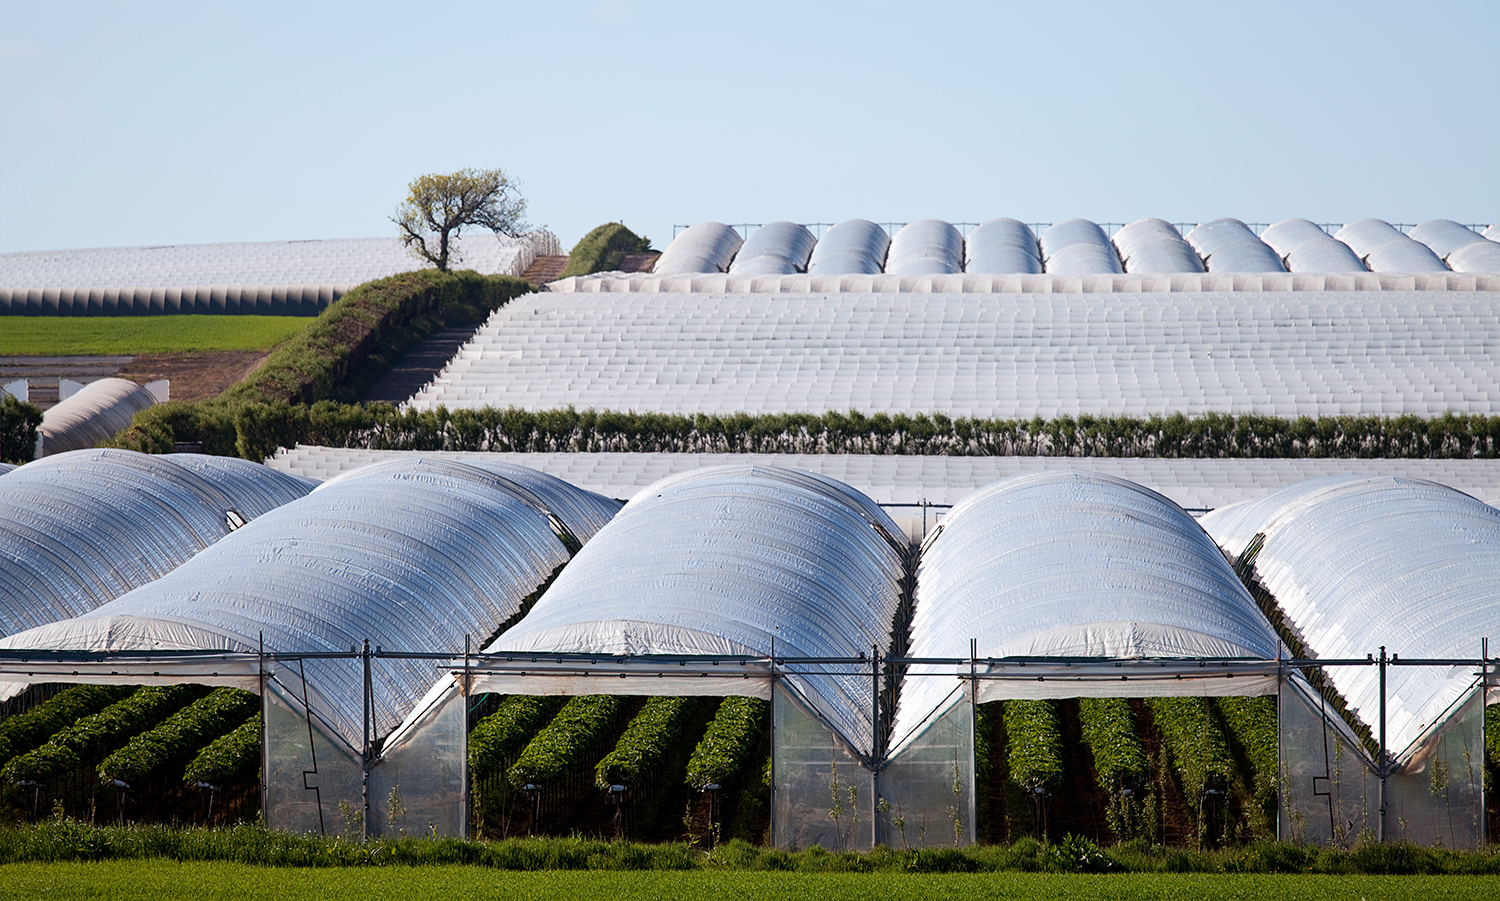 Polytunnel agriculture